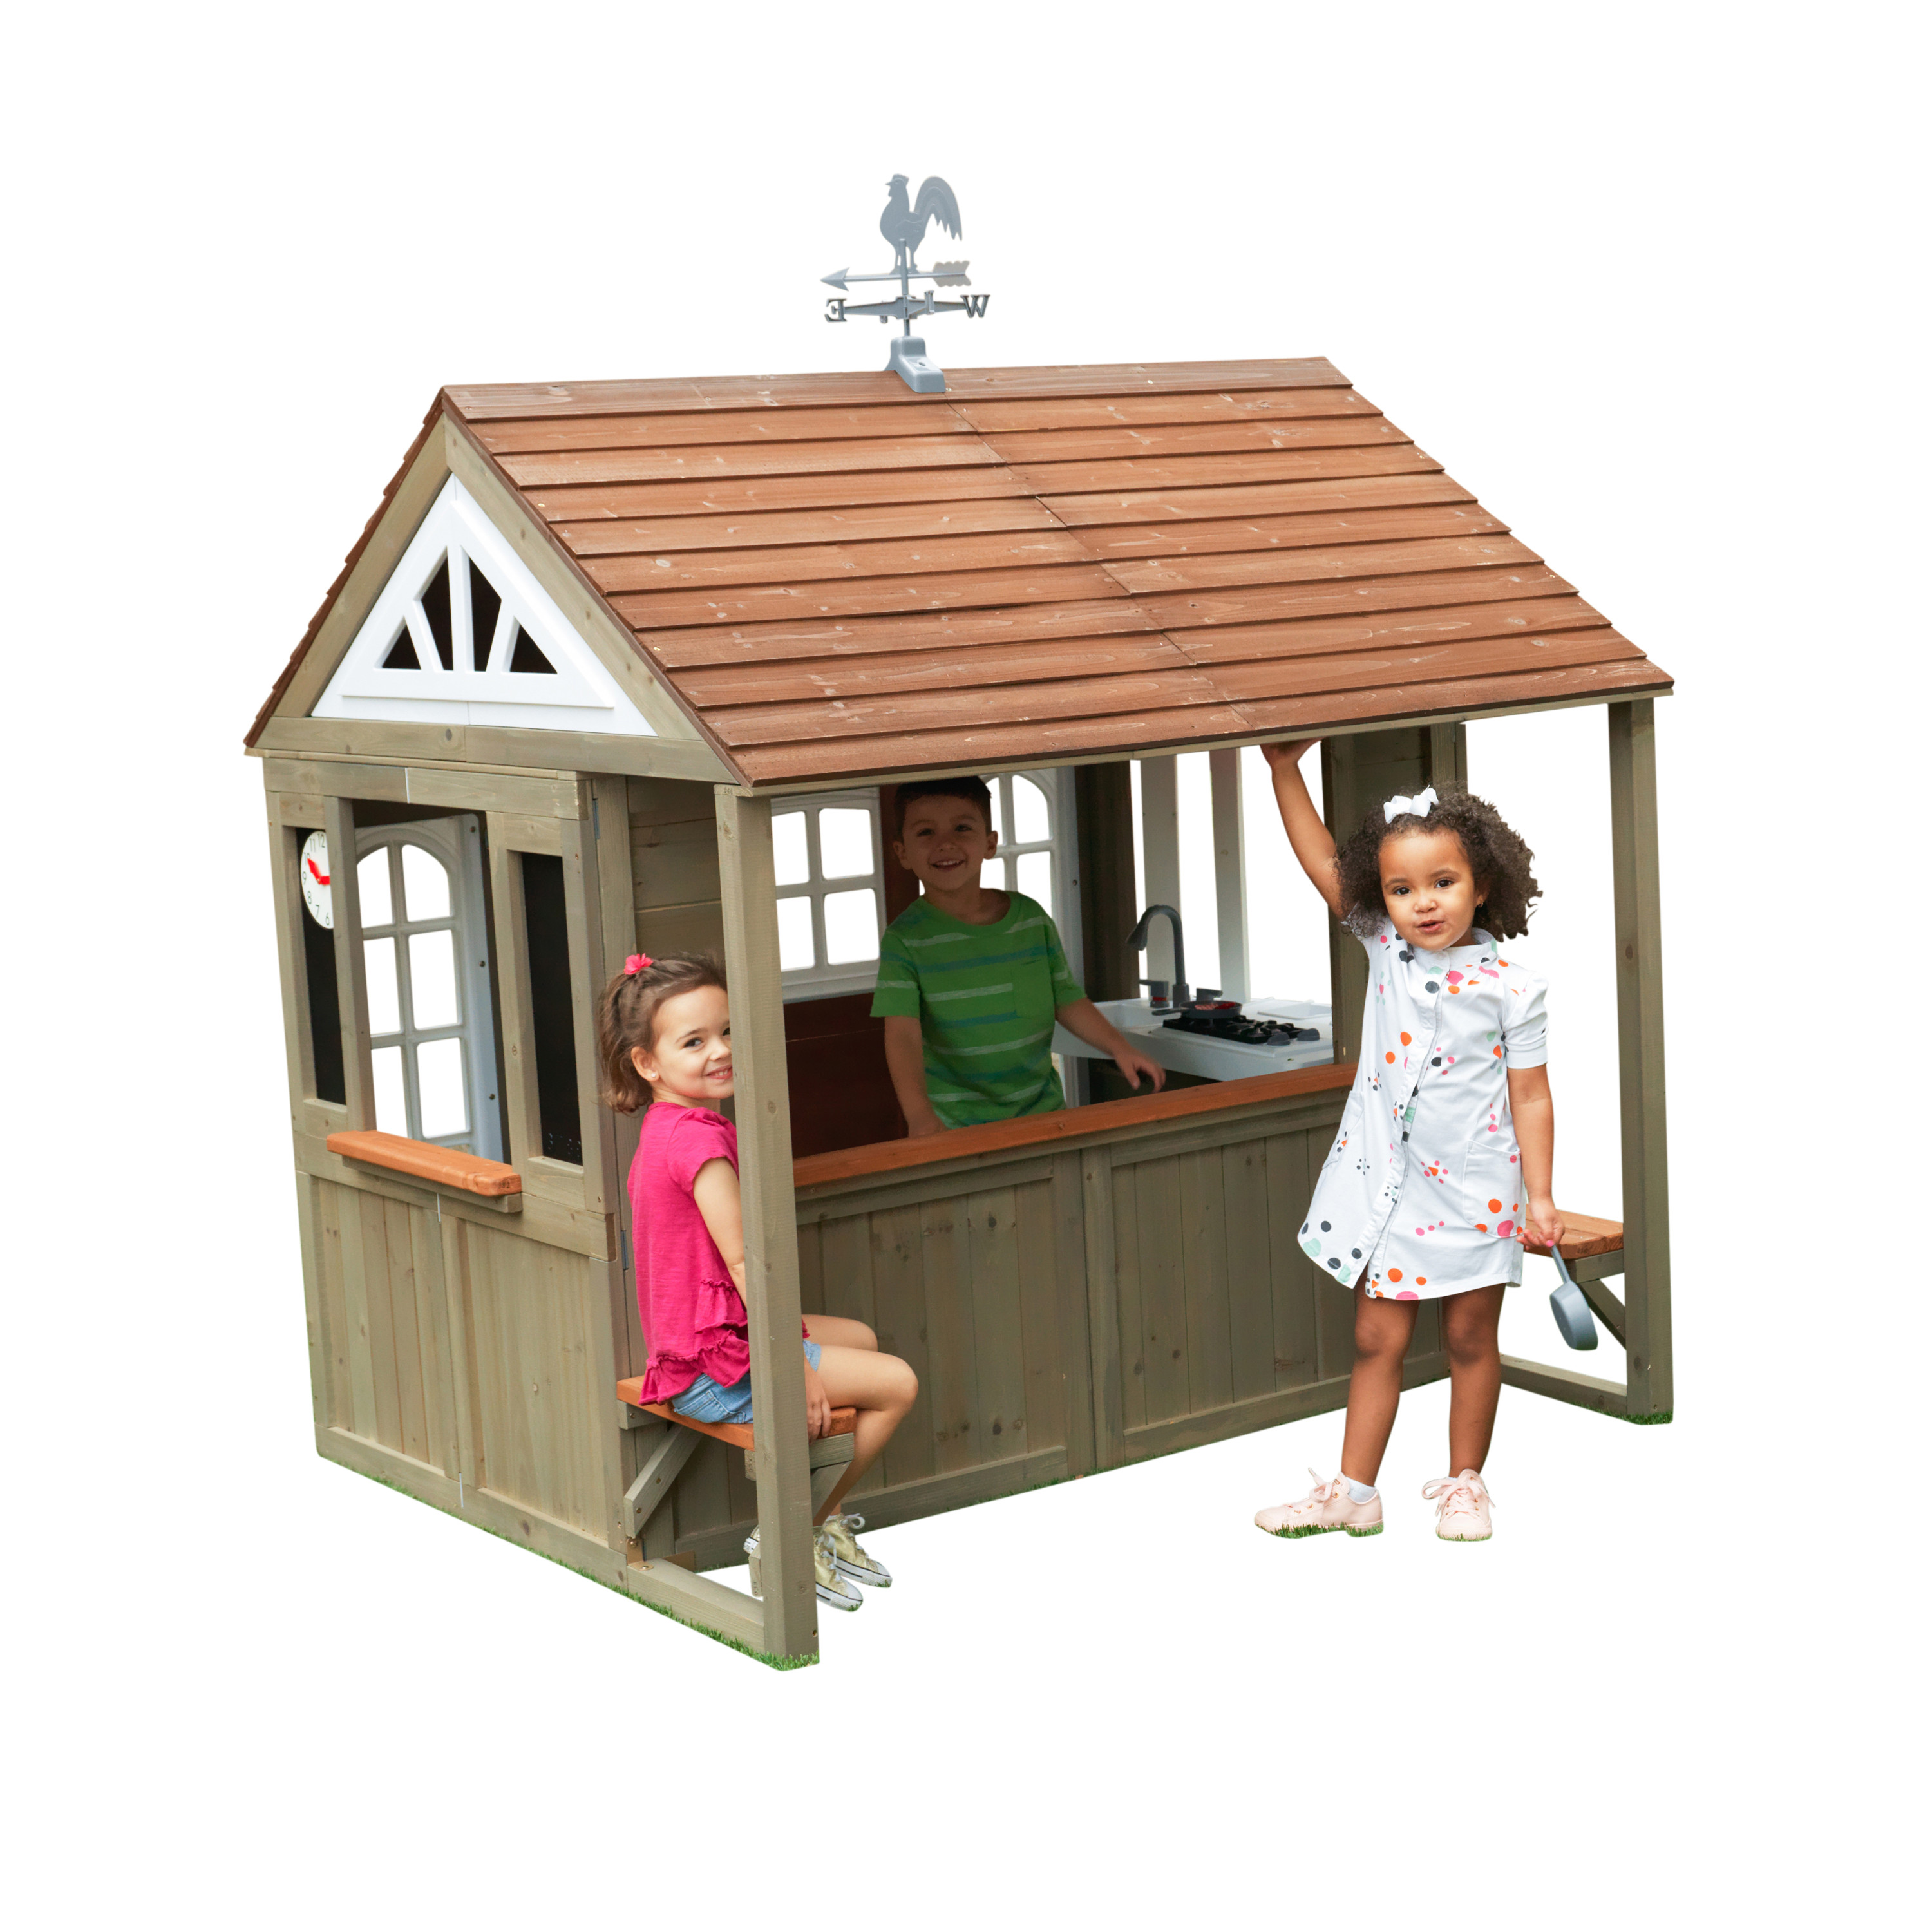 KidKraft Country Vista Wooden Outdoor Playhouse with Double Doors, Play Kitchen & Benches - image 1 of 28